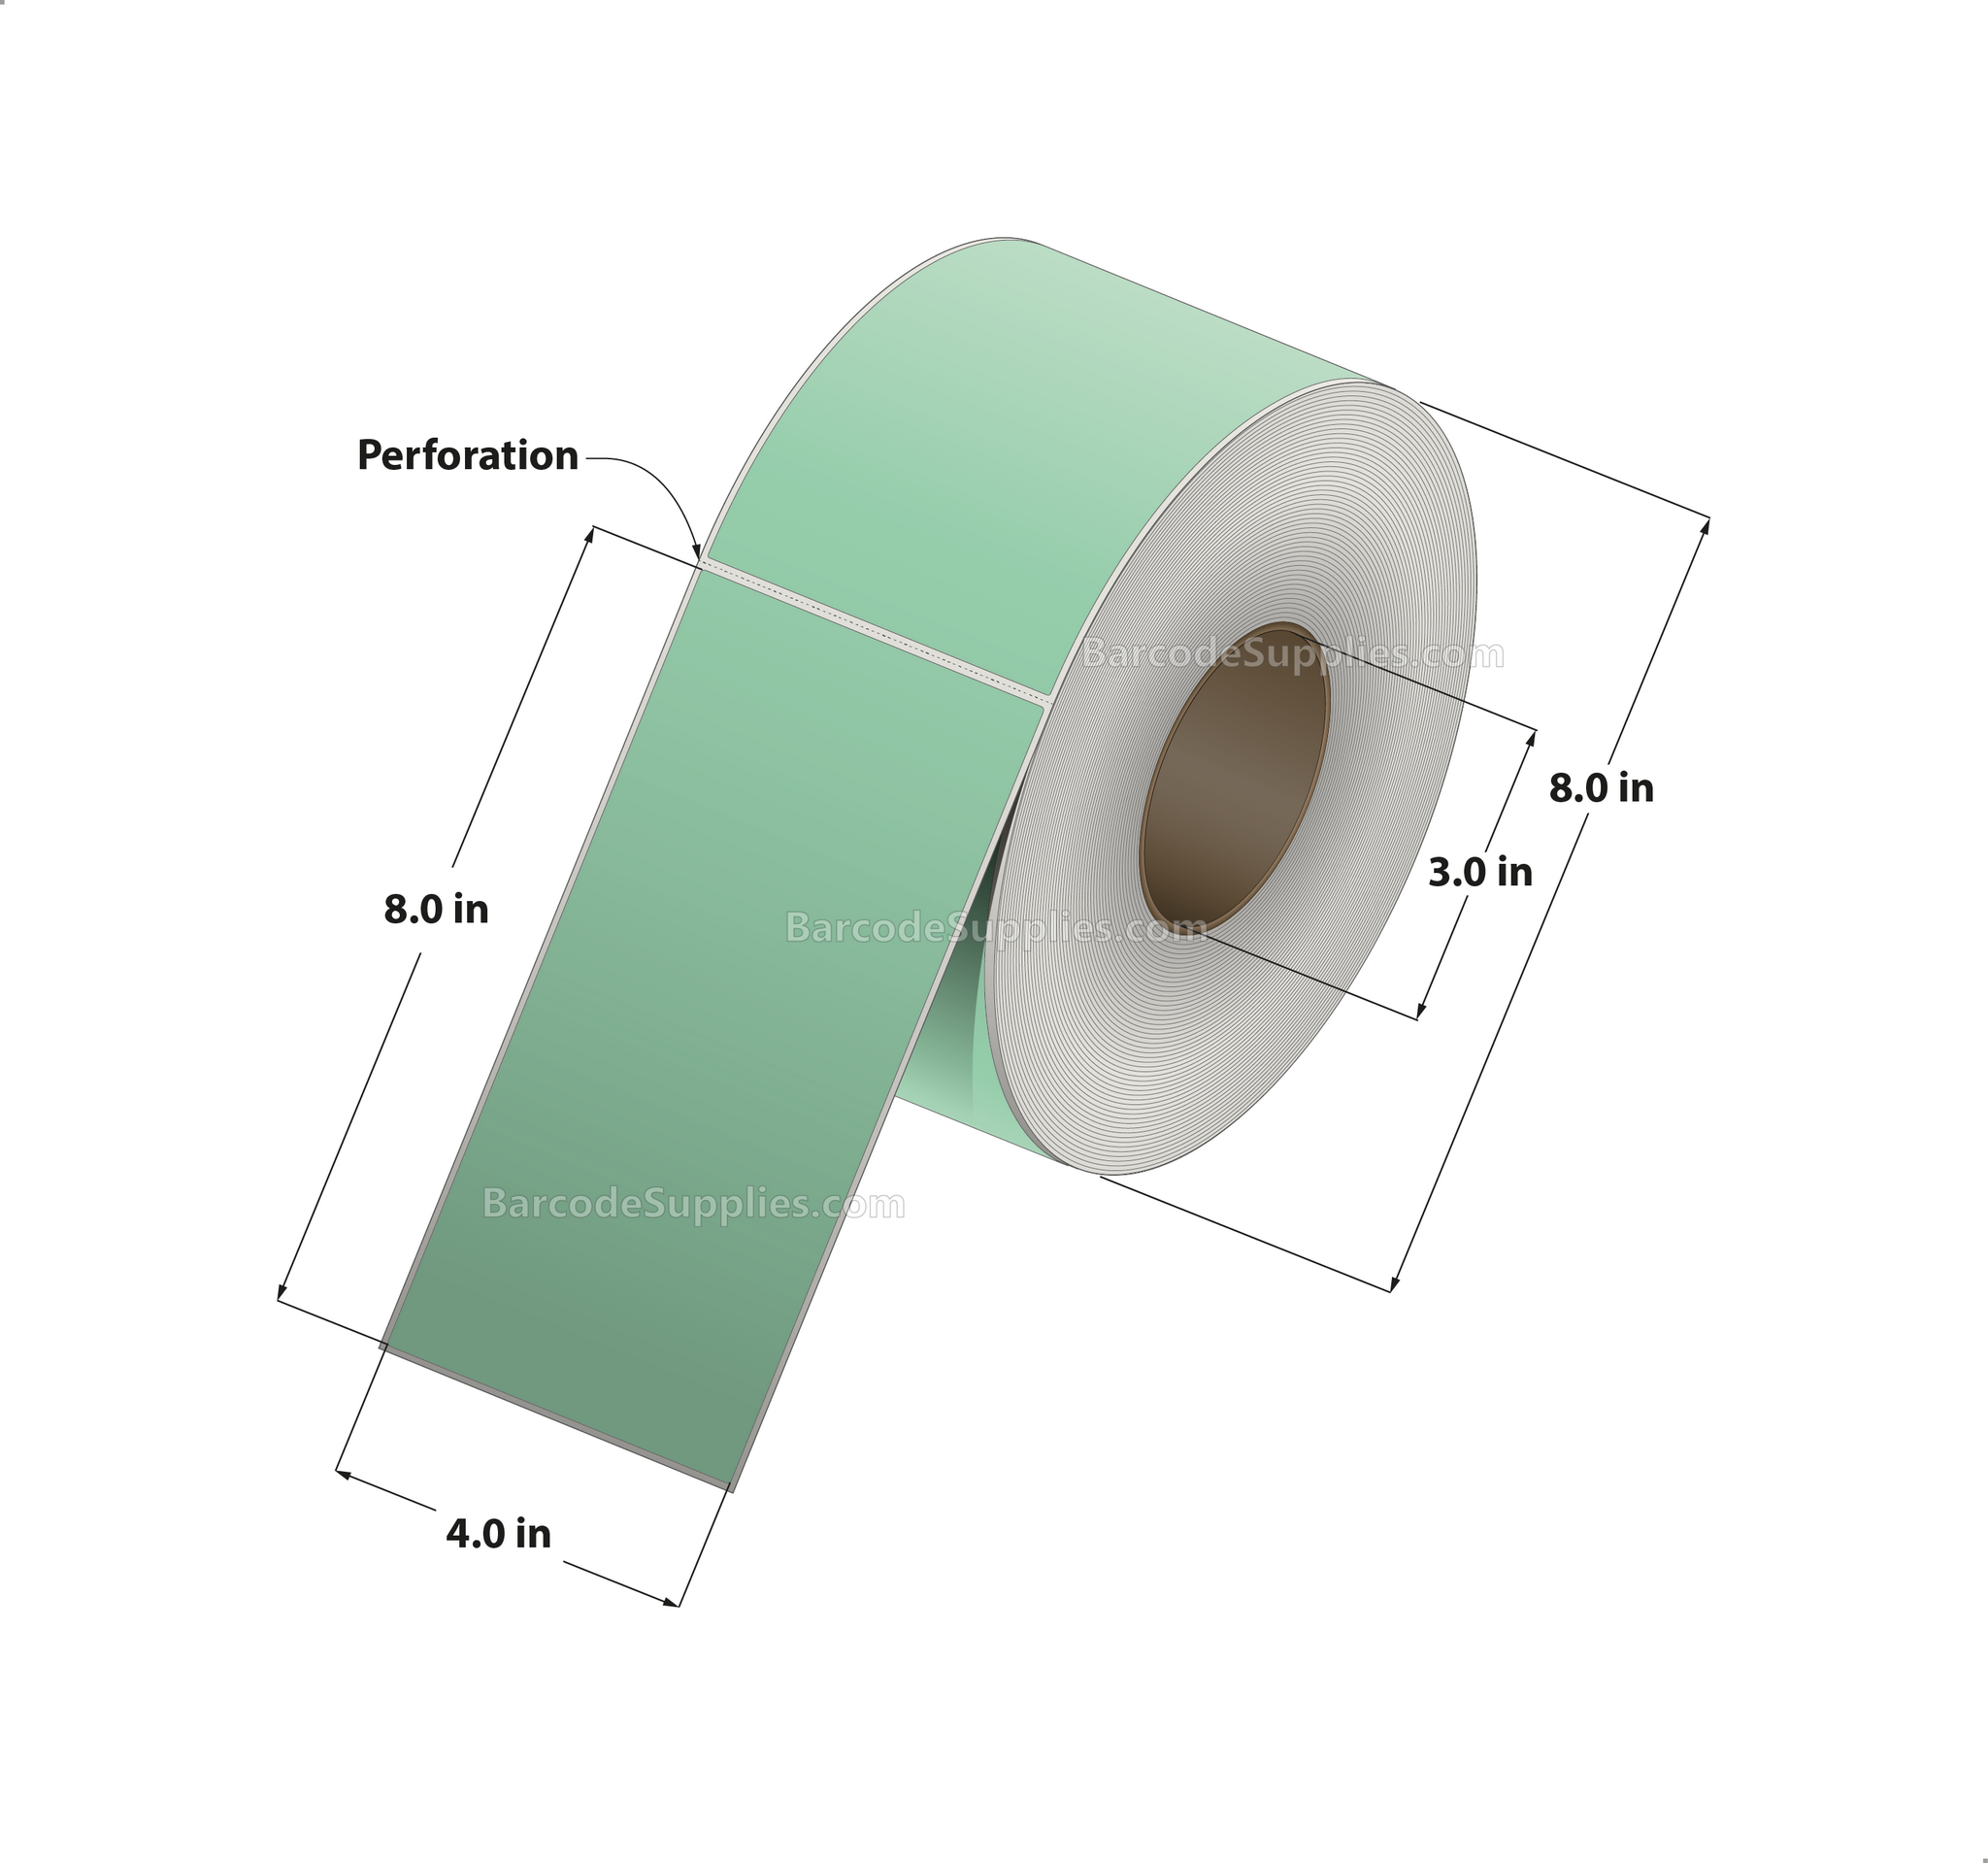 4 x 8 Thermal Transfer 345 Green Labels With Permanent Adhesive - Perforated - 750 Labels Per Roll - Carton Of 4 Rolls - 3000 Labels Total - MPN: RFC-4-8-750-GR